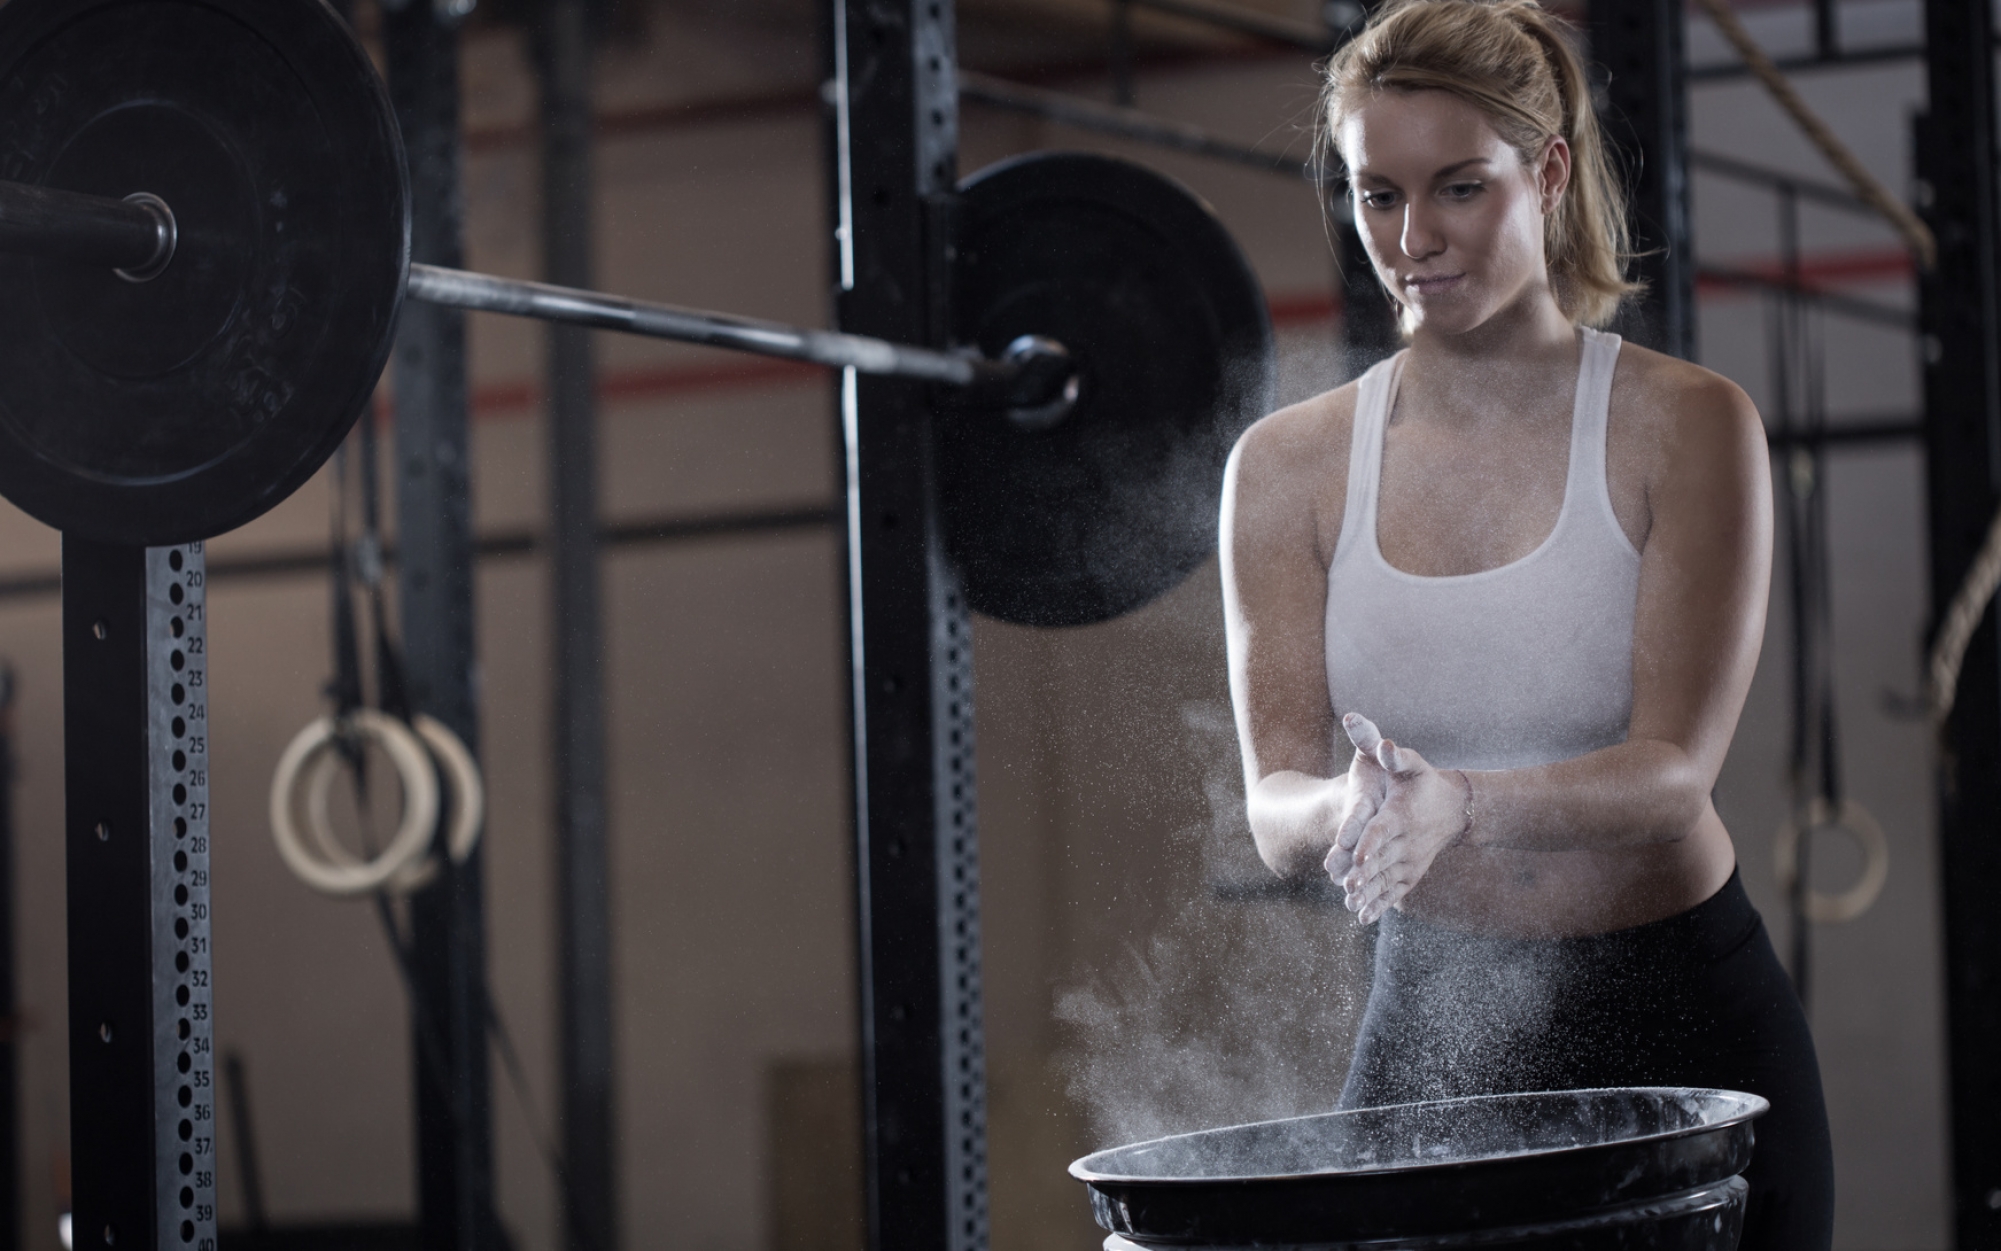 5 Ways To Motivate Yourself To Get Into The Gym